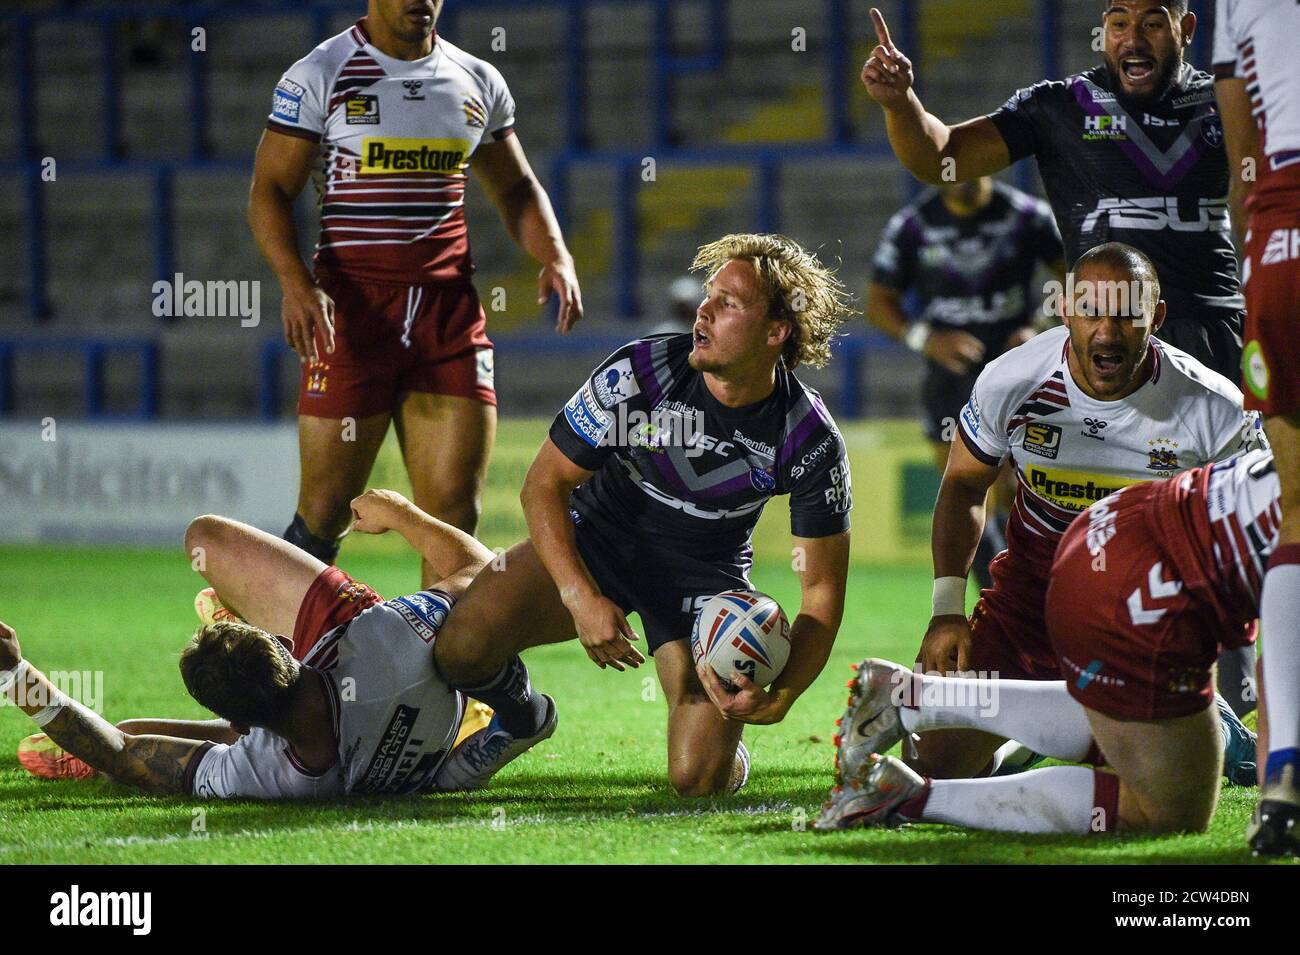 Wakefield Trinity's Jacob Miller cut through to score a try. Stock Photo